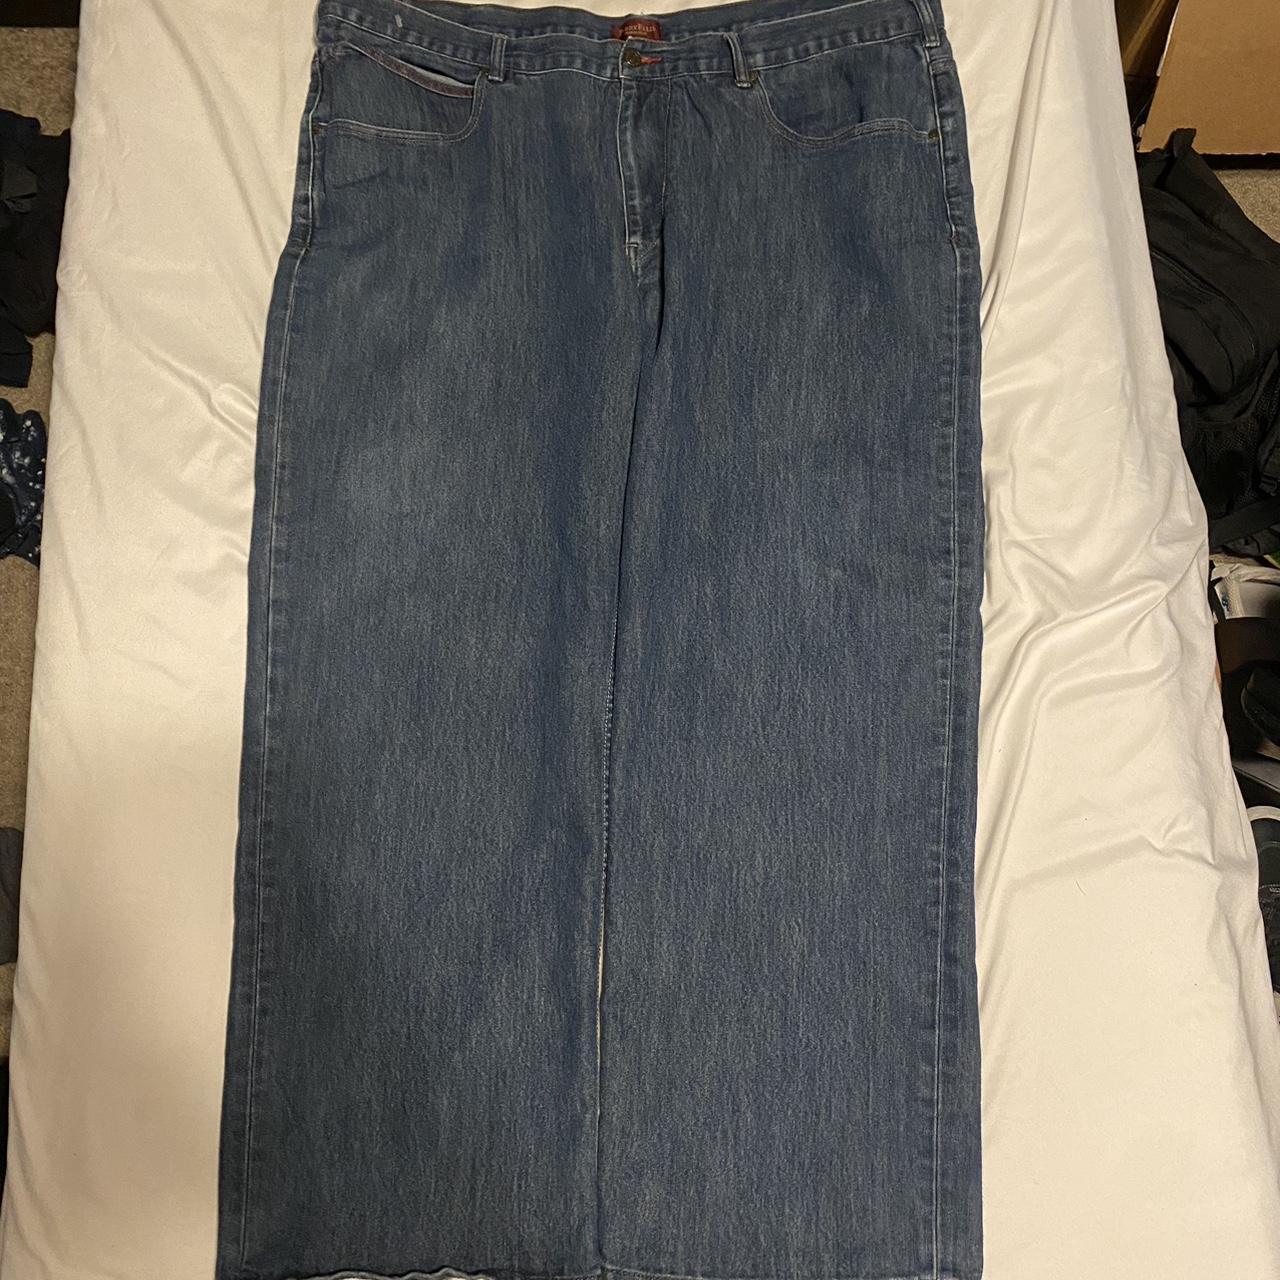 Perry Ellis 44x32 baggy asl jeans. Found these at... - Depop